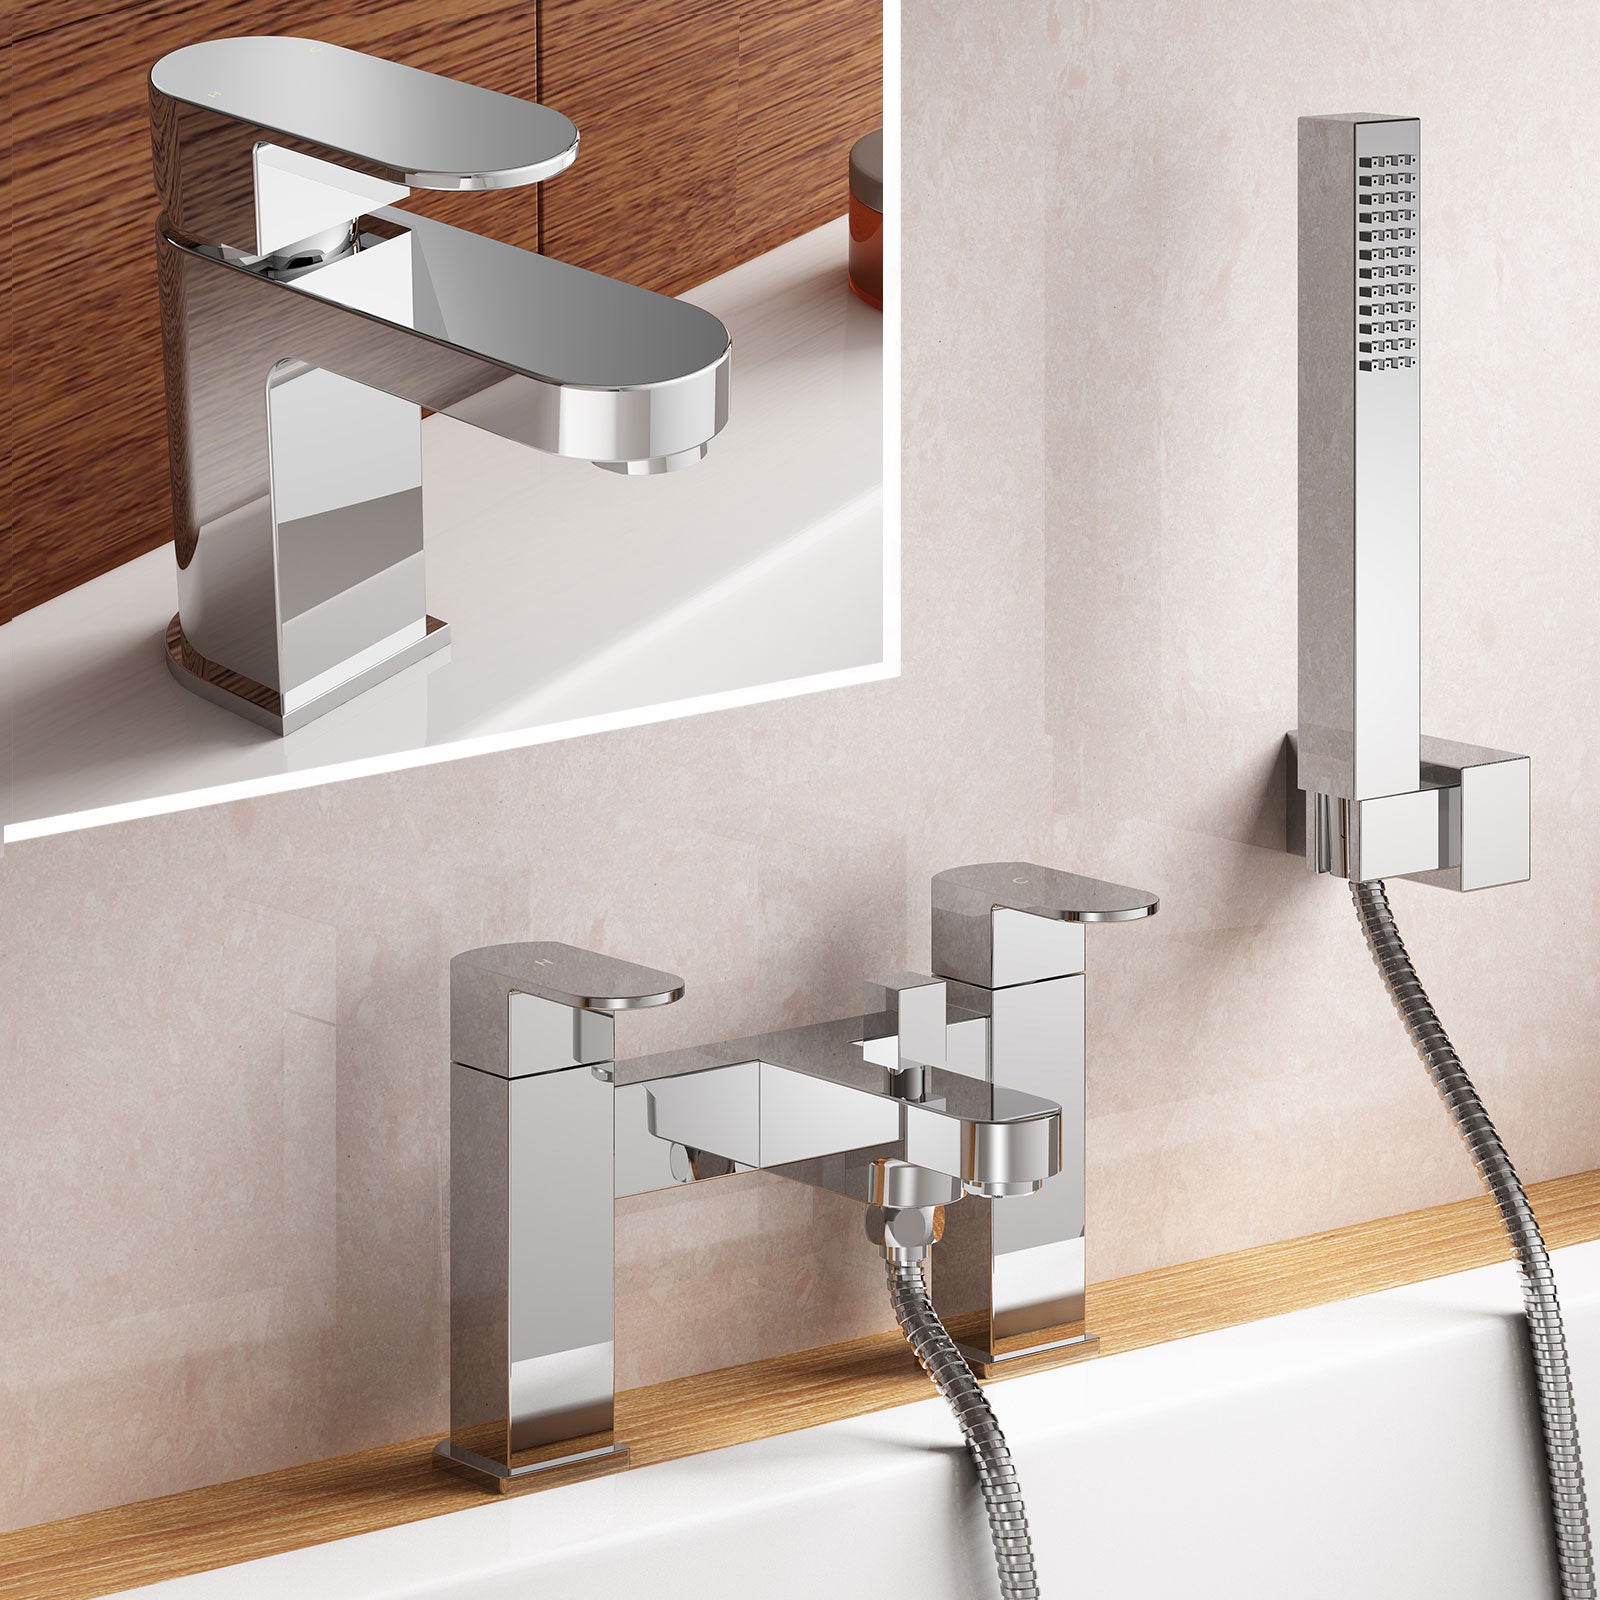 Eclipse Contemporary Design Set Of Chrome Bathroom Basin Single Lever Tap And Bath Shower Mixer With Handset Kit